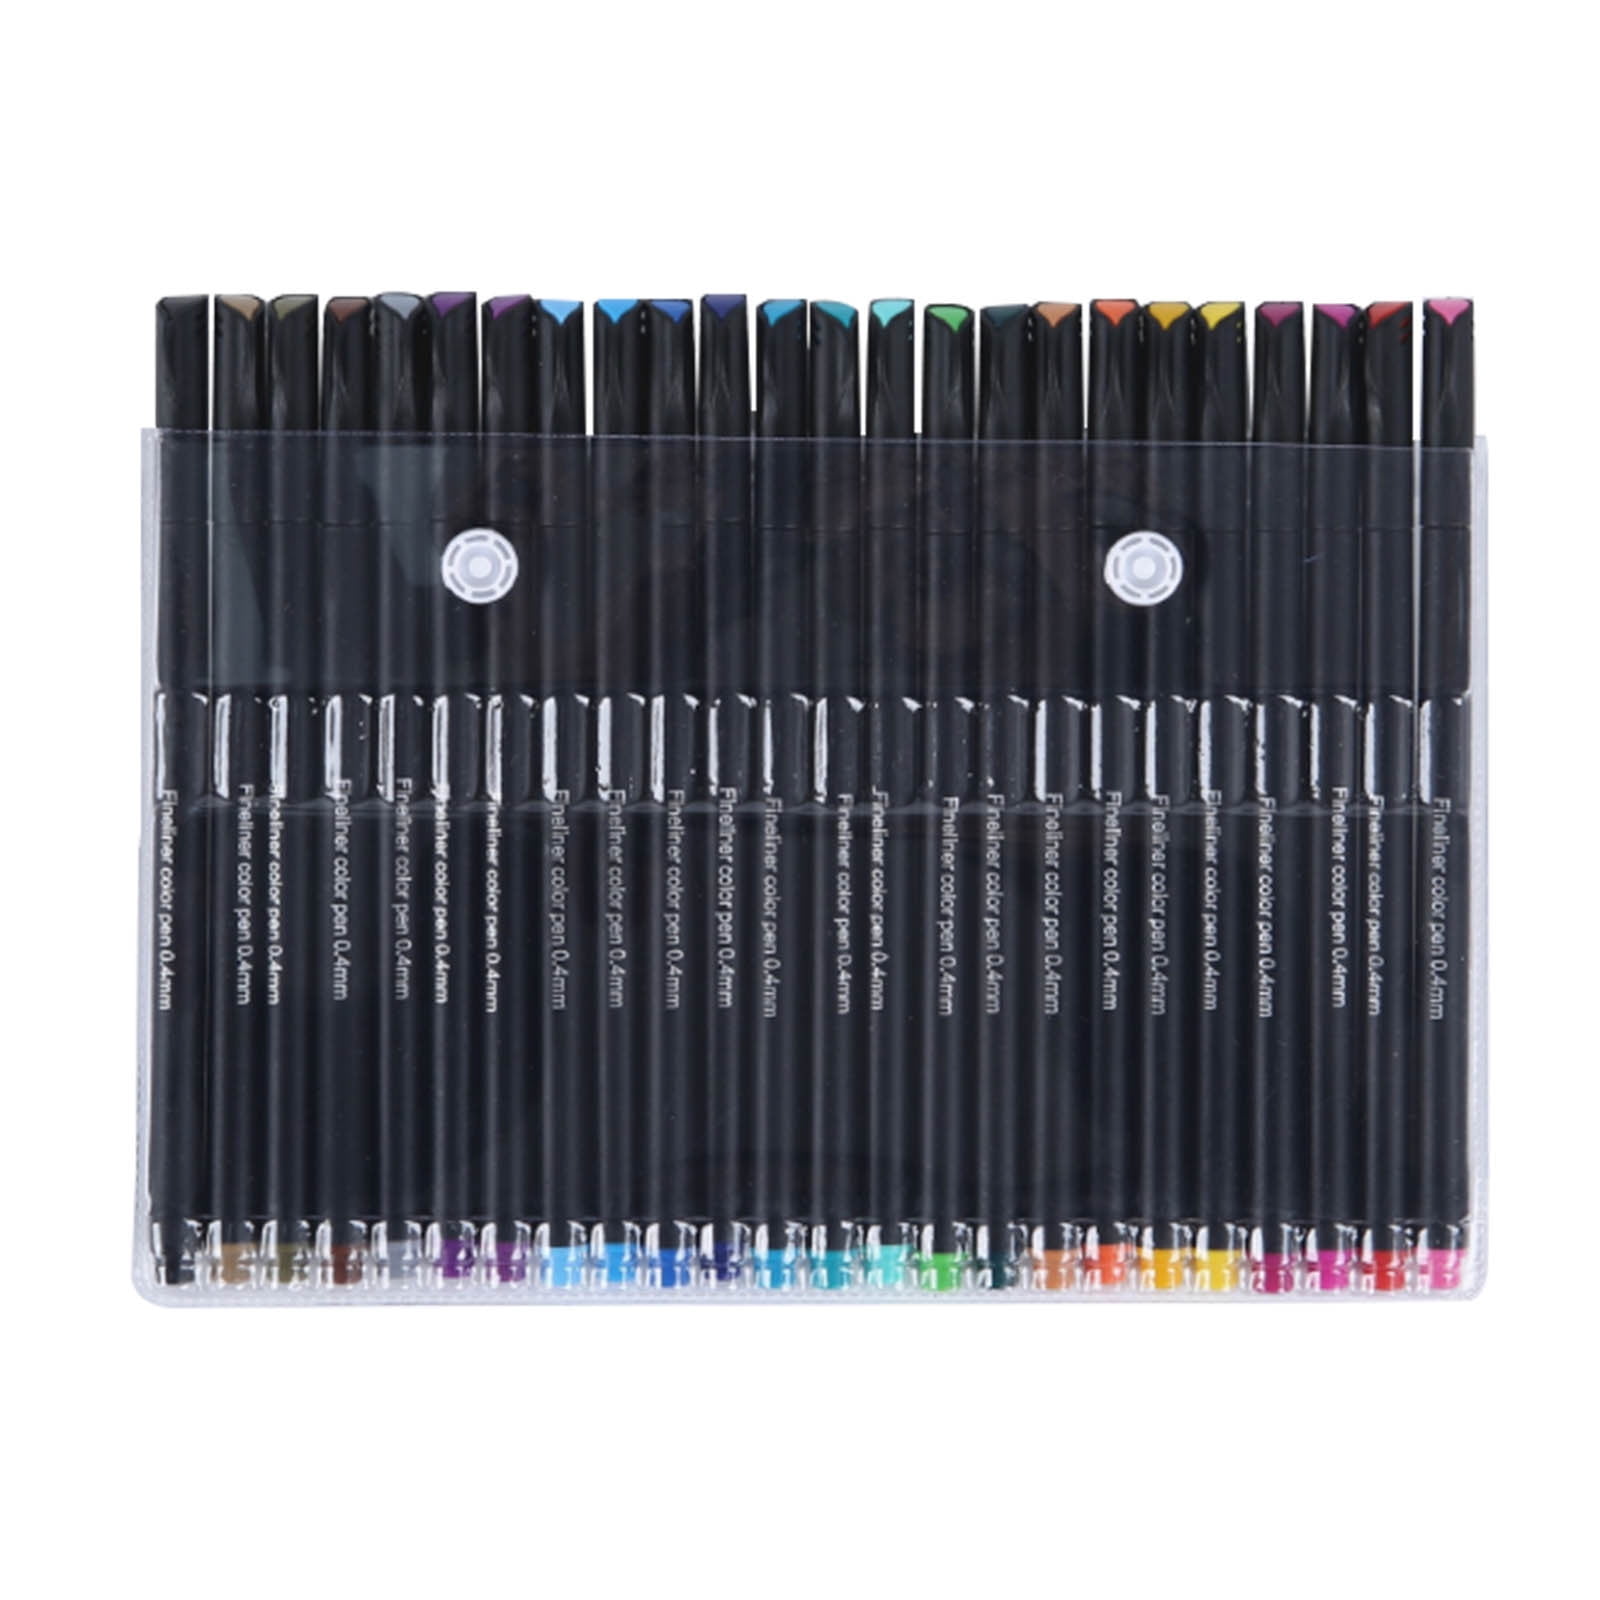 qucoqpe School Supplies Colored Pencils New 24 Color Water-based Thread  Drawing Pen Set Needle Pen Manual Account 20ml Aesthetic School Supplies 